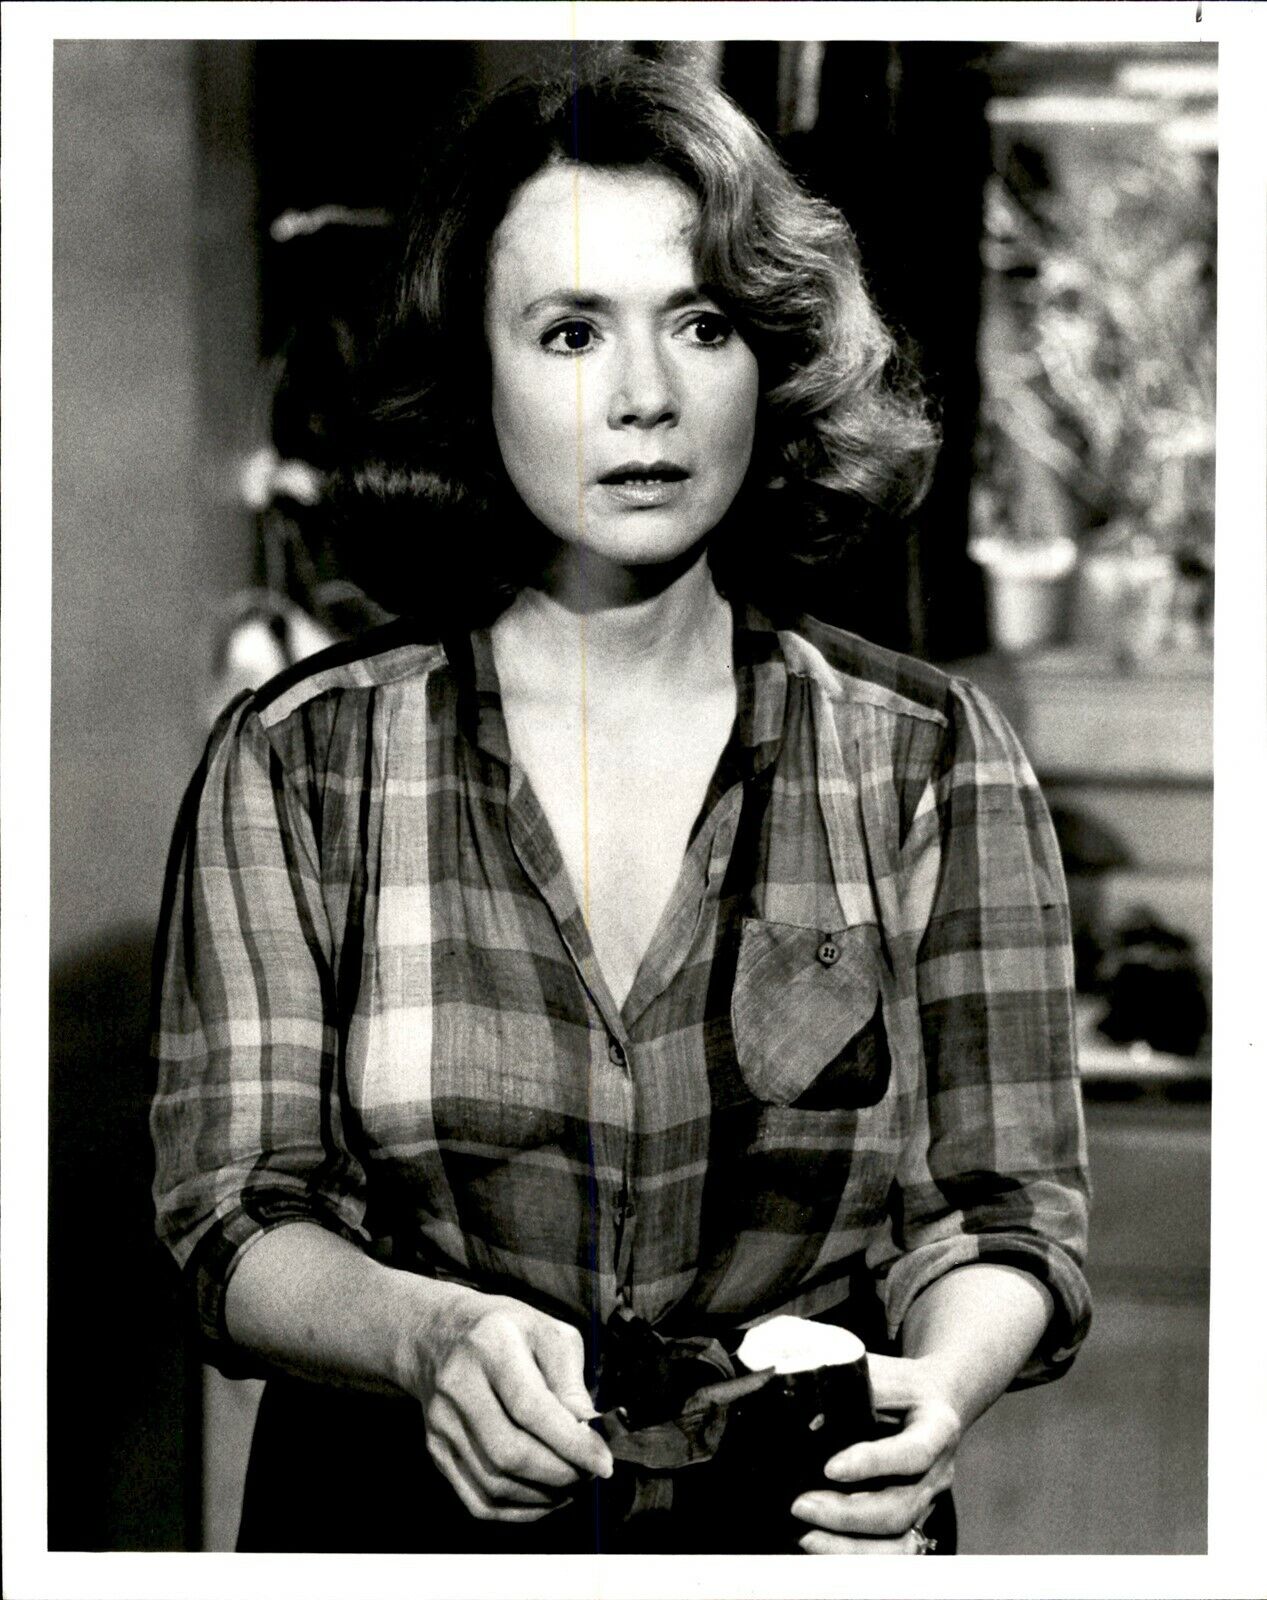 LG928 1979 Original NBC Photo PIPER LAURIE IN TV SERIES DEBUT Actress in Stag